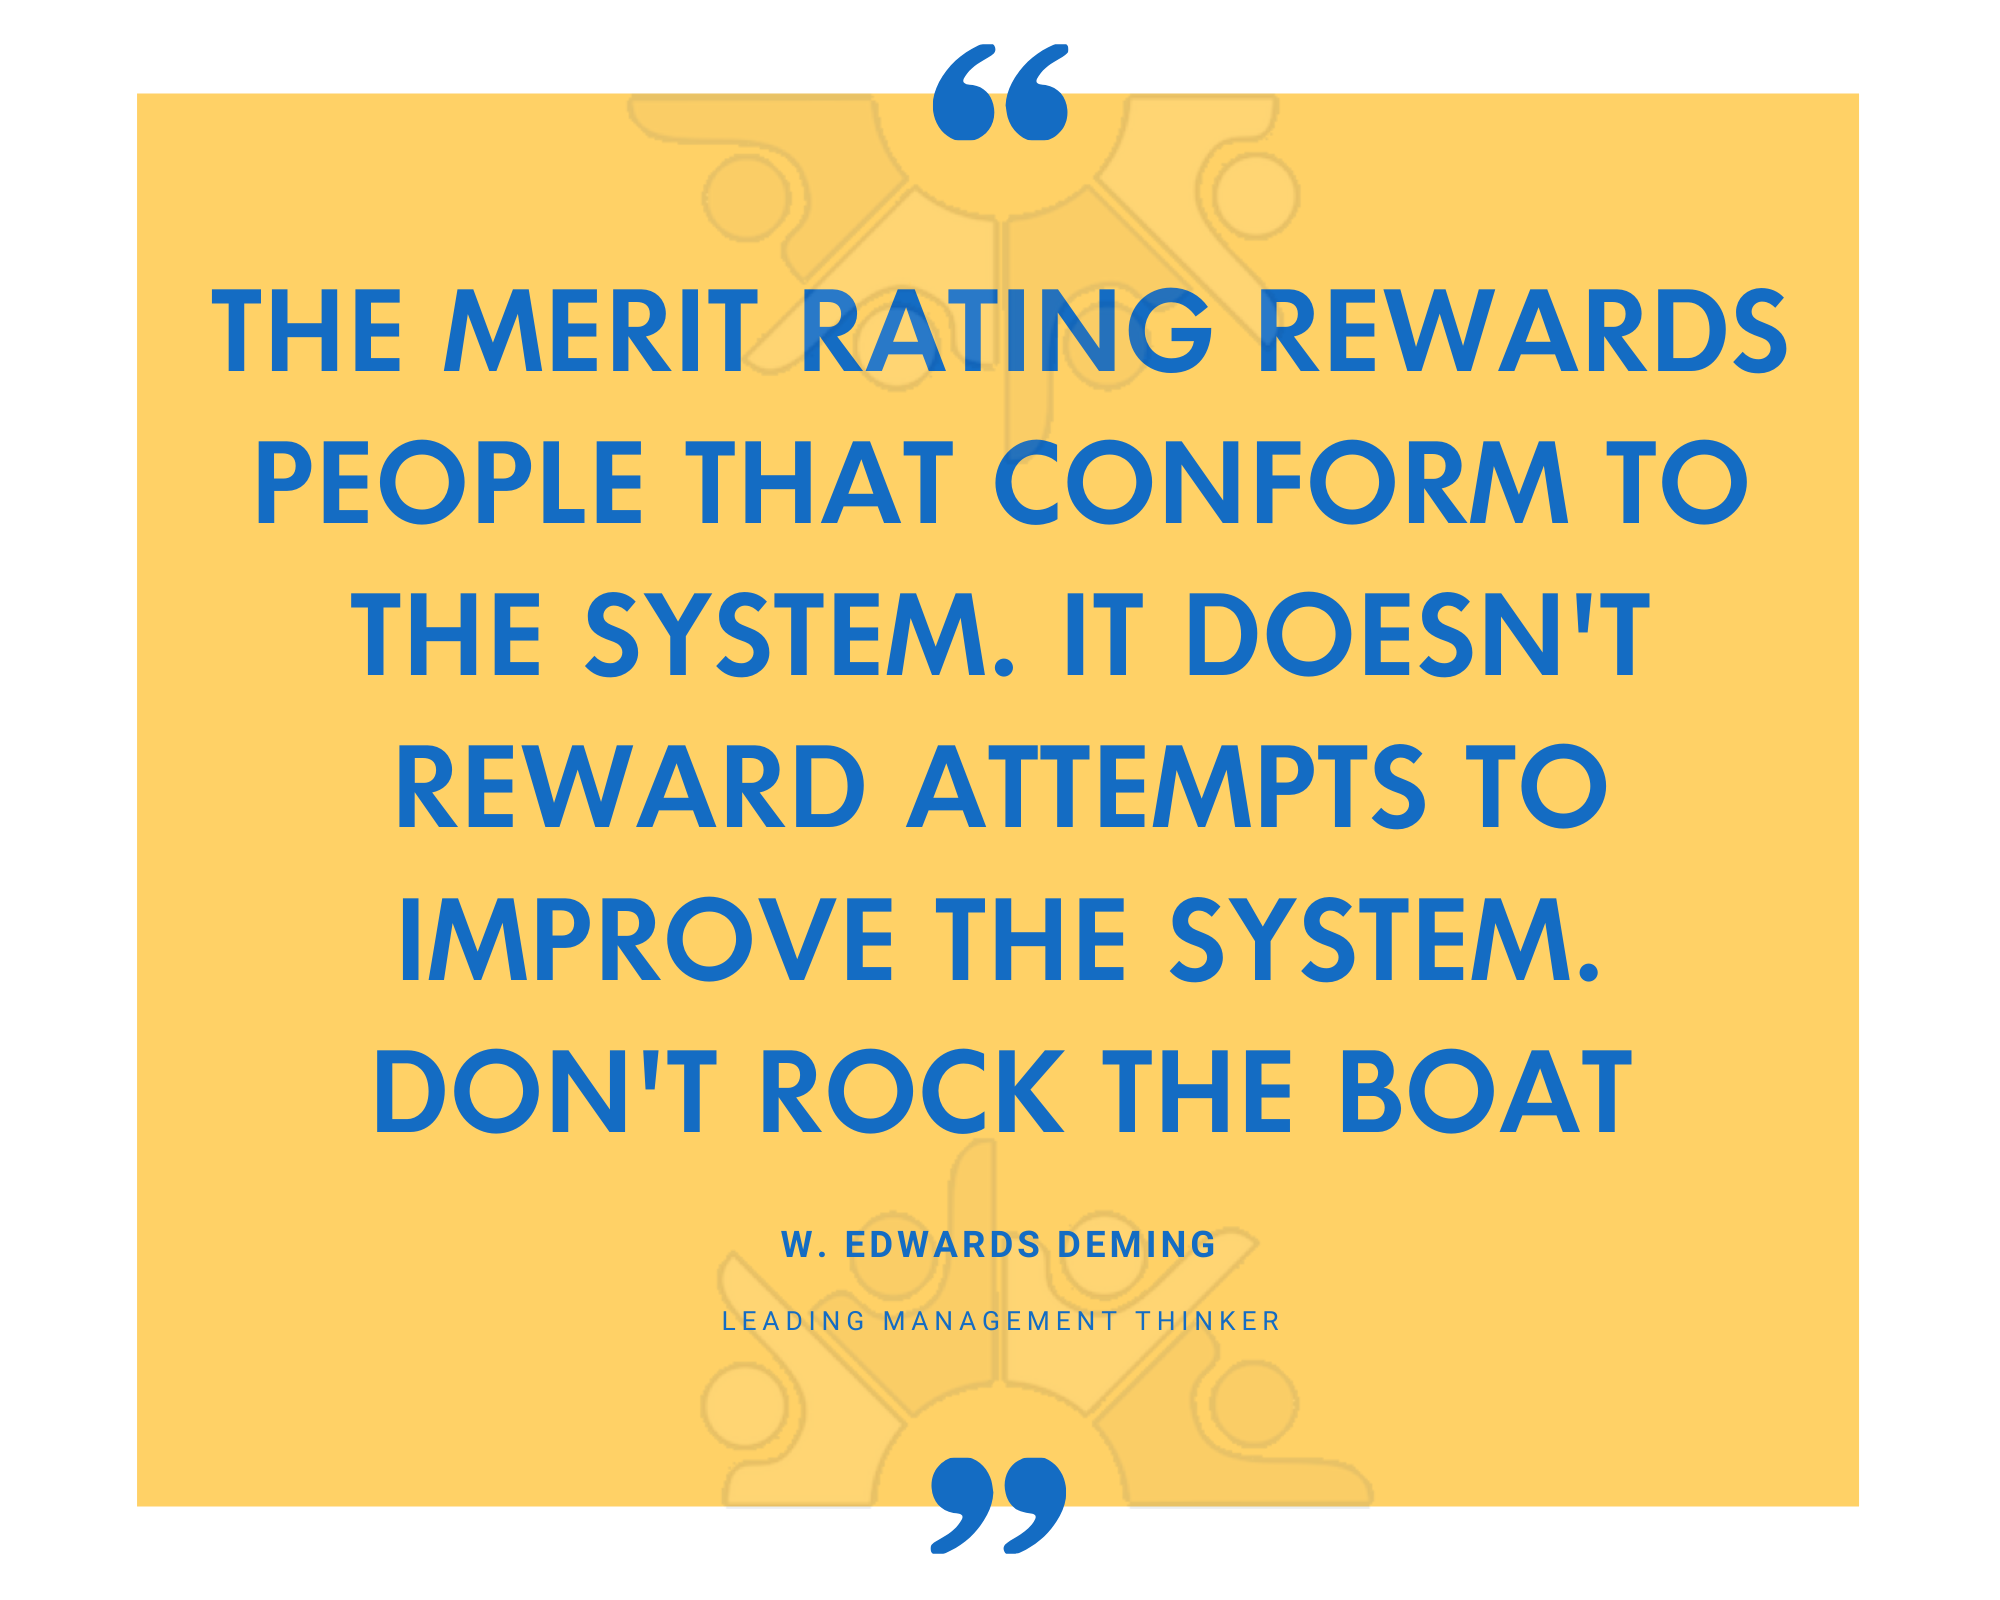 QUOTE The merit rating rewards people that conform to the system